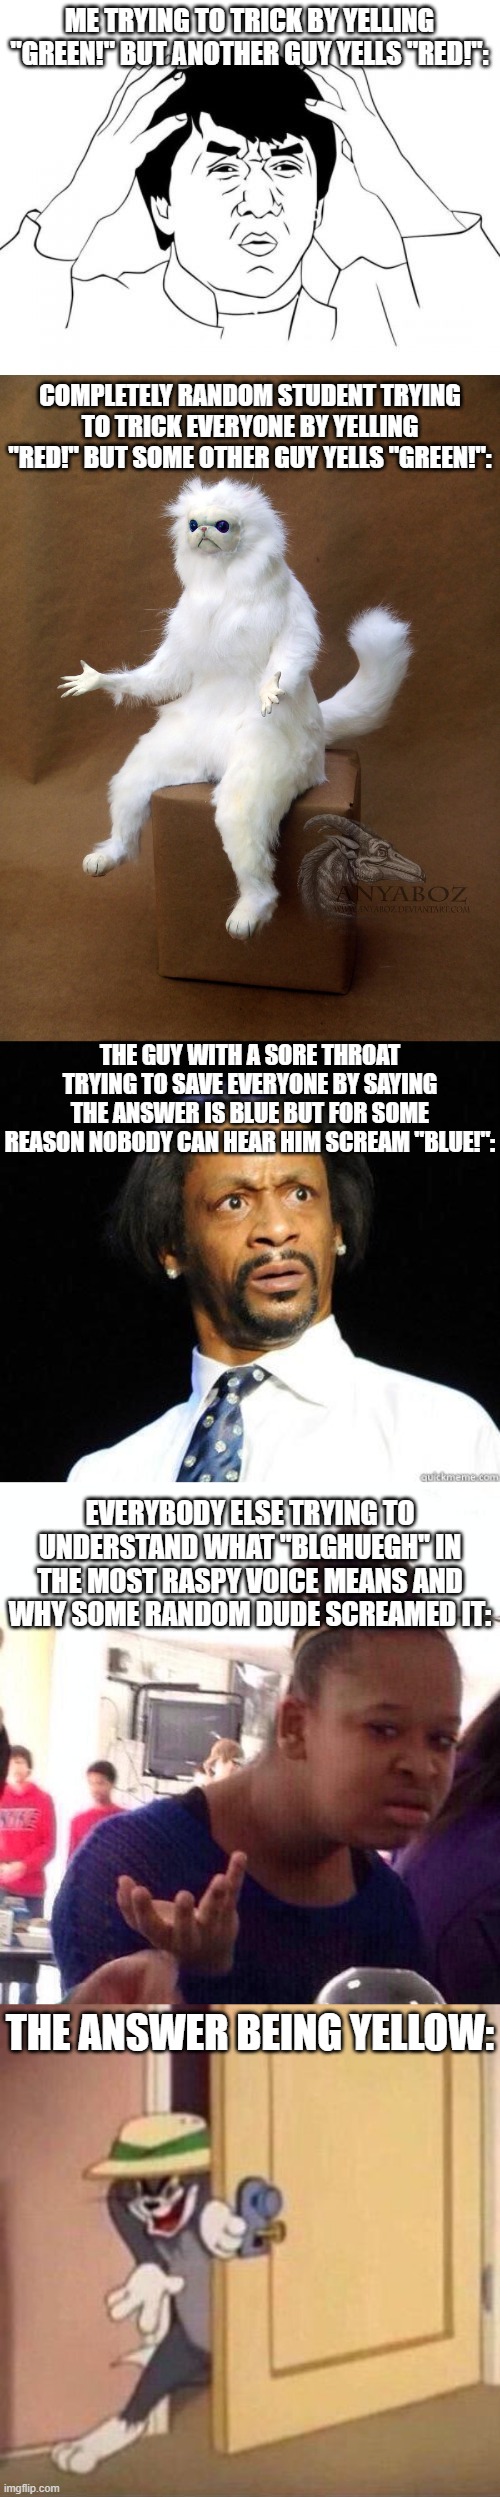 ME TRYING TO TRICK BY YELLING "GREEN!" BUT ANOTHER GUY YELLS "RED!": COMPLETELY RANDOM STUDENT TRYING TO TRICK EVERYONE BY YELLING "RED!" BU | image tagged in memes,jackie chan wtf,persian cat room guardian single,katt williams wtf meme,black girl wat,sneaky tom | made w/ Imgflip meme maker